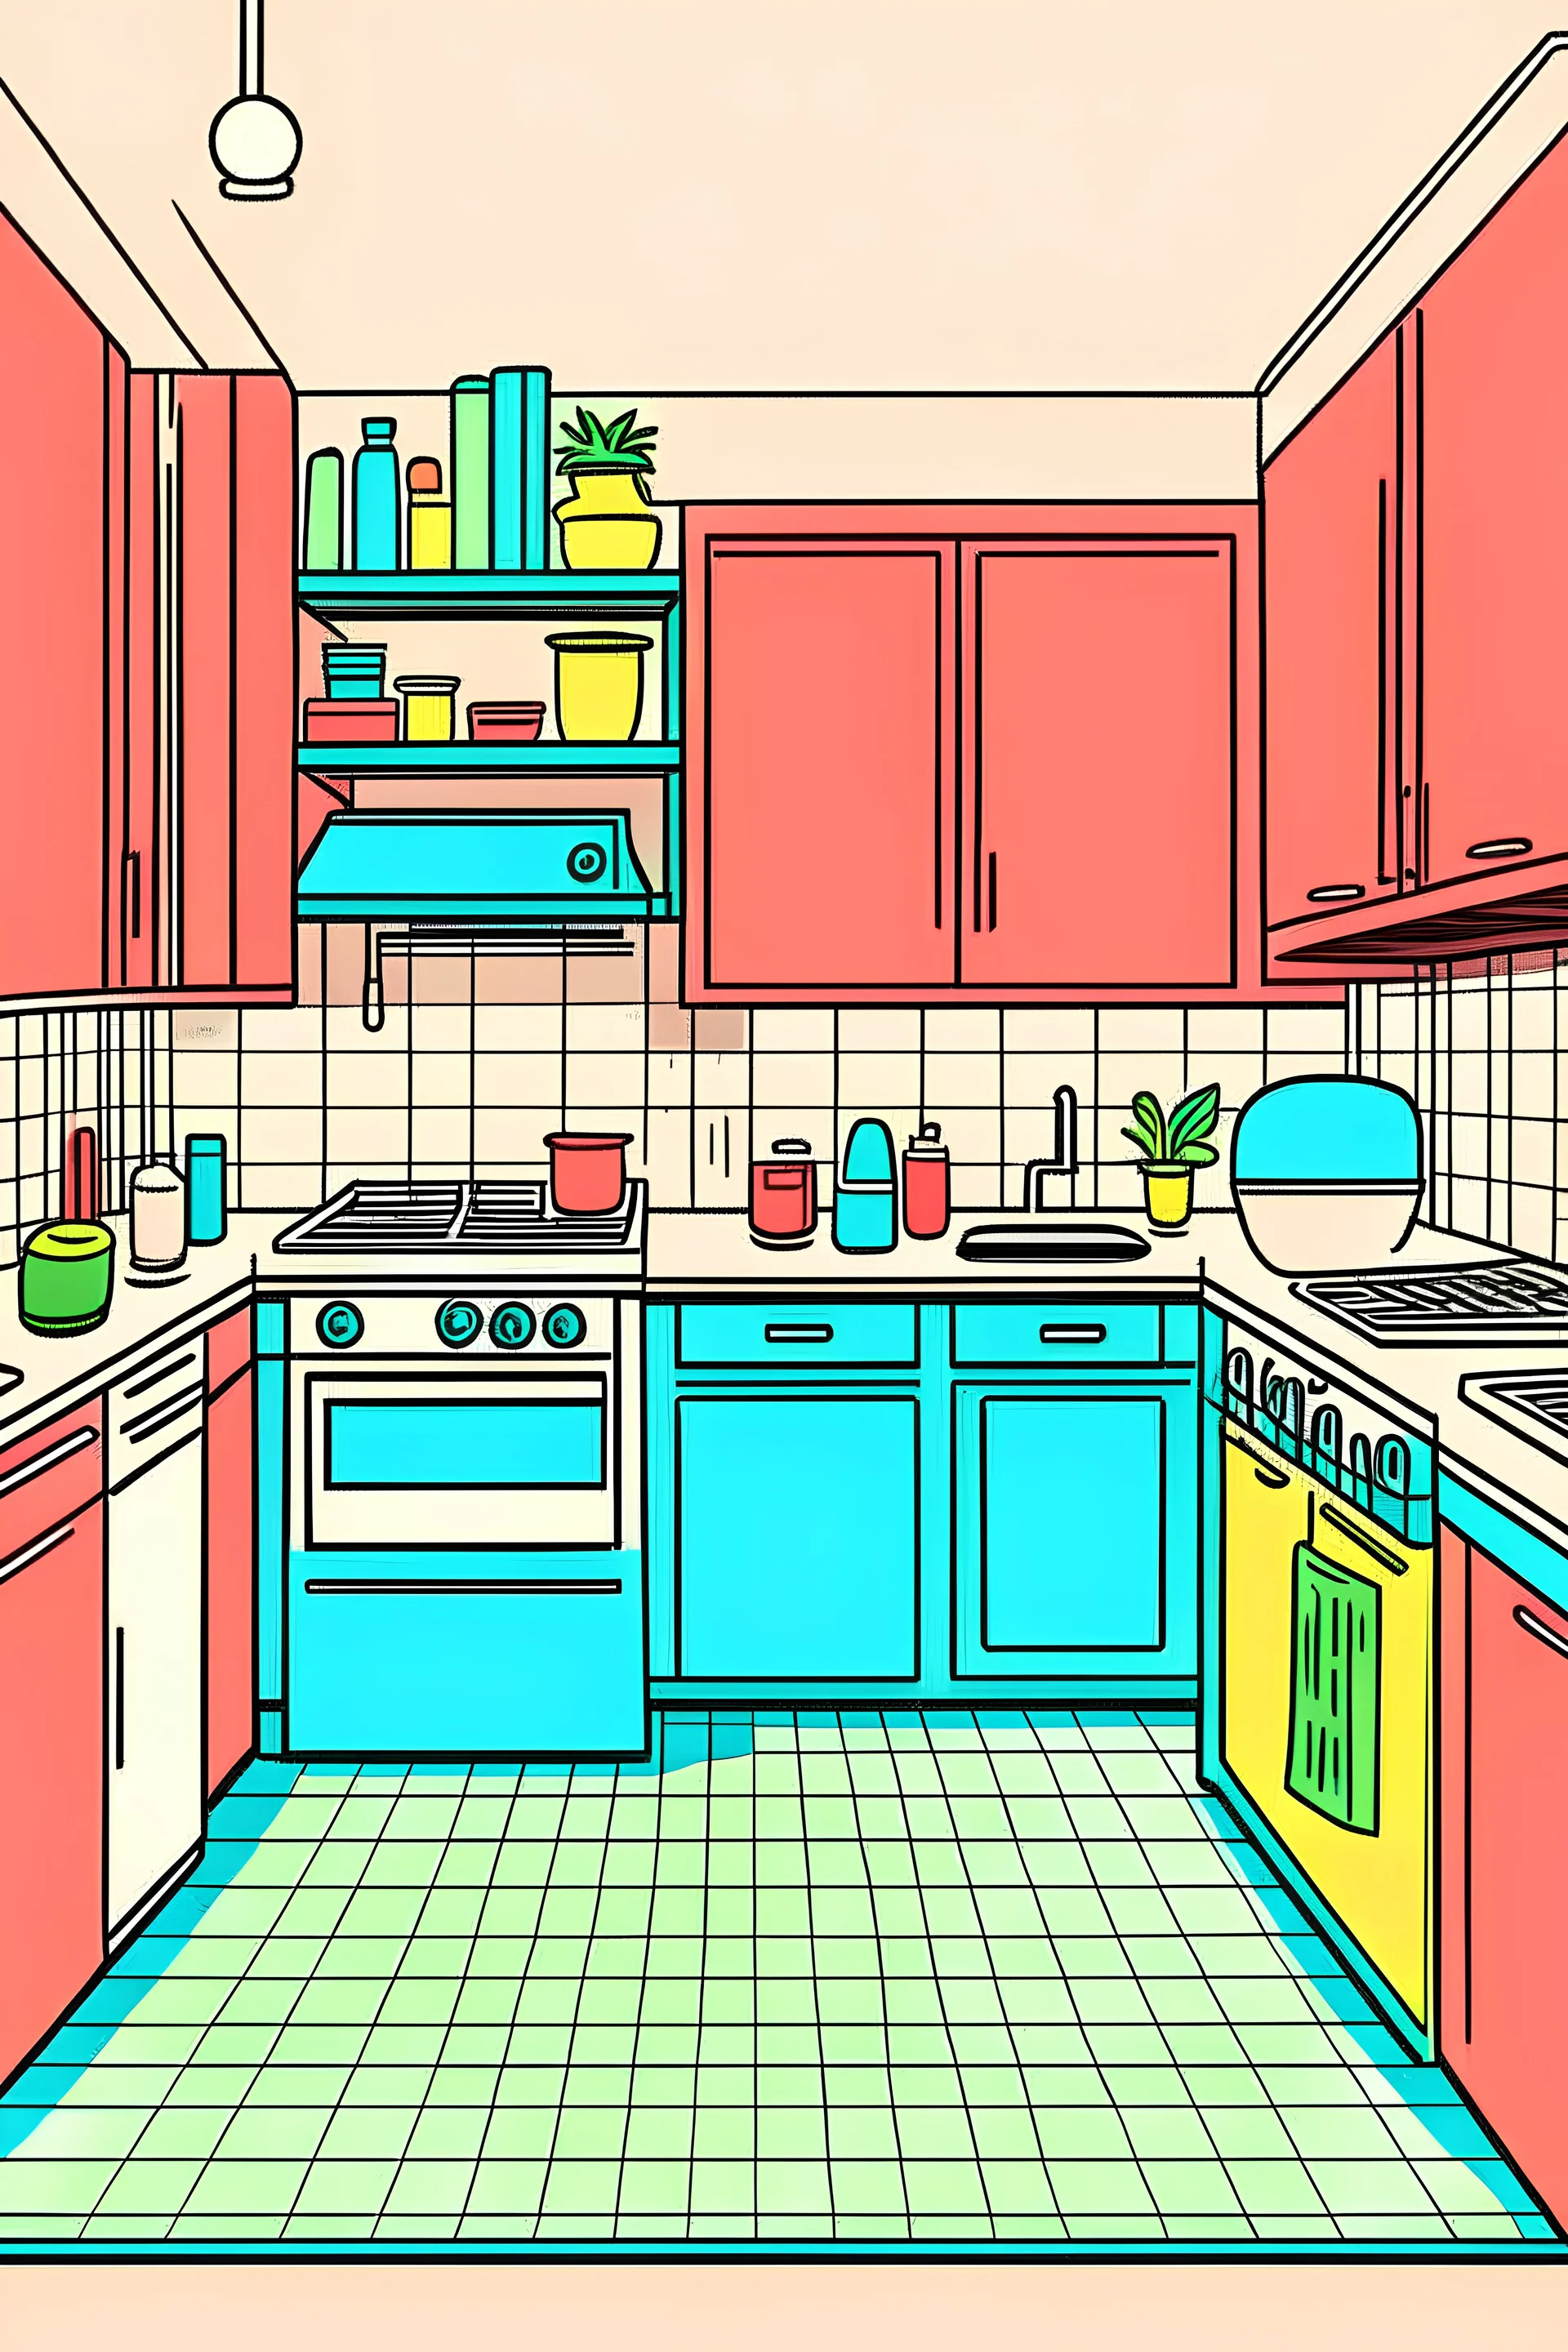 A cartoon drawing of a kitchen in the form of a straight, colored line